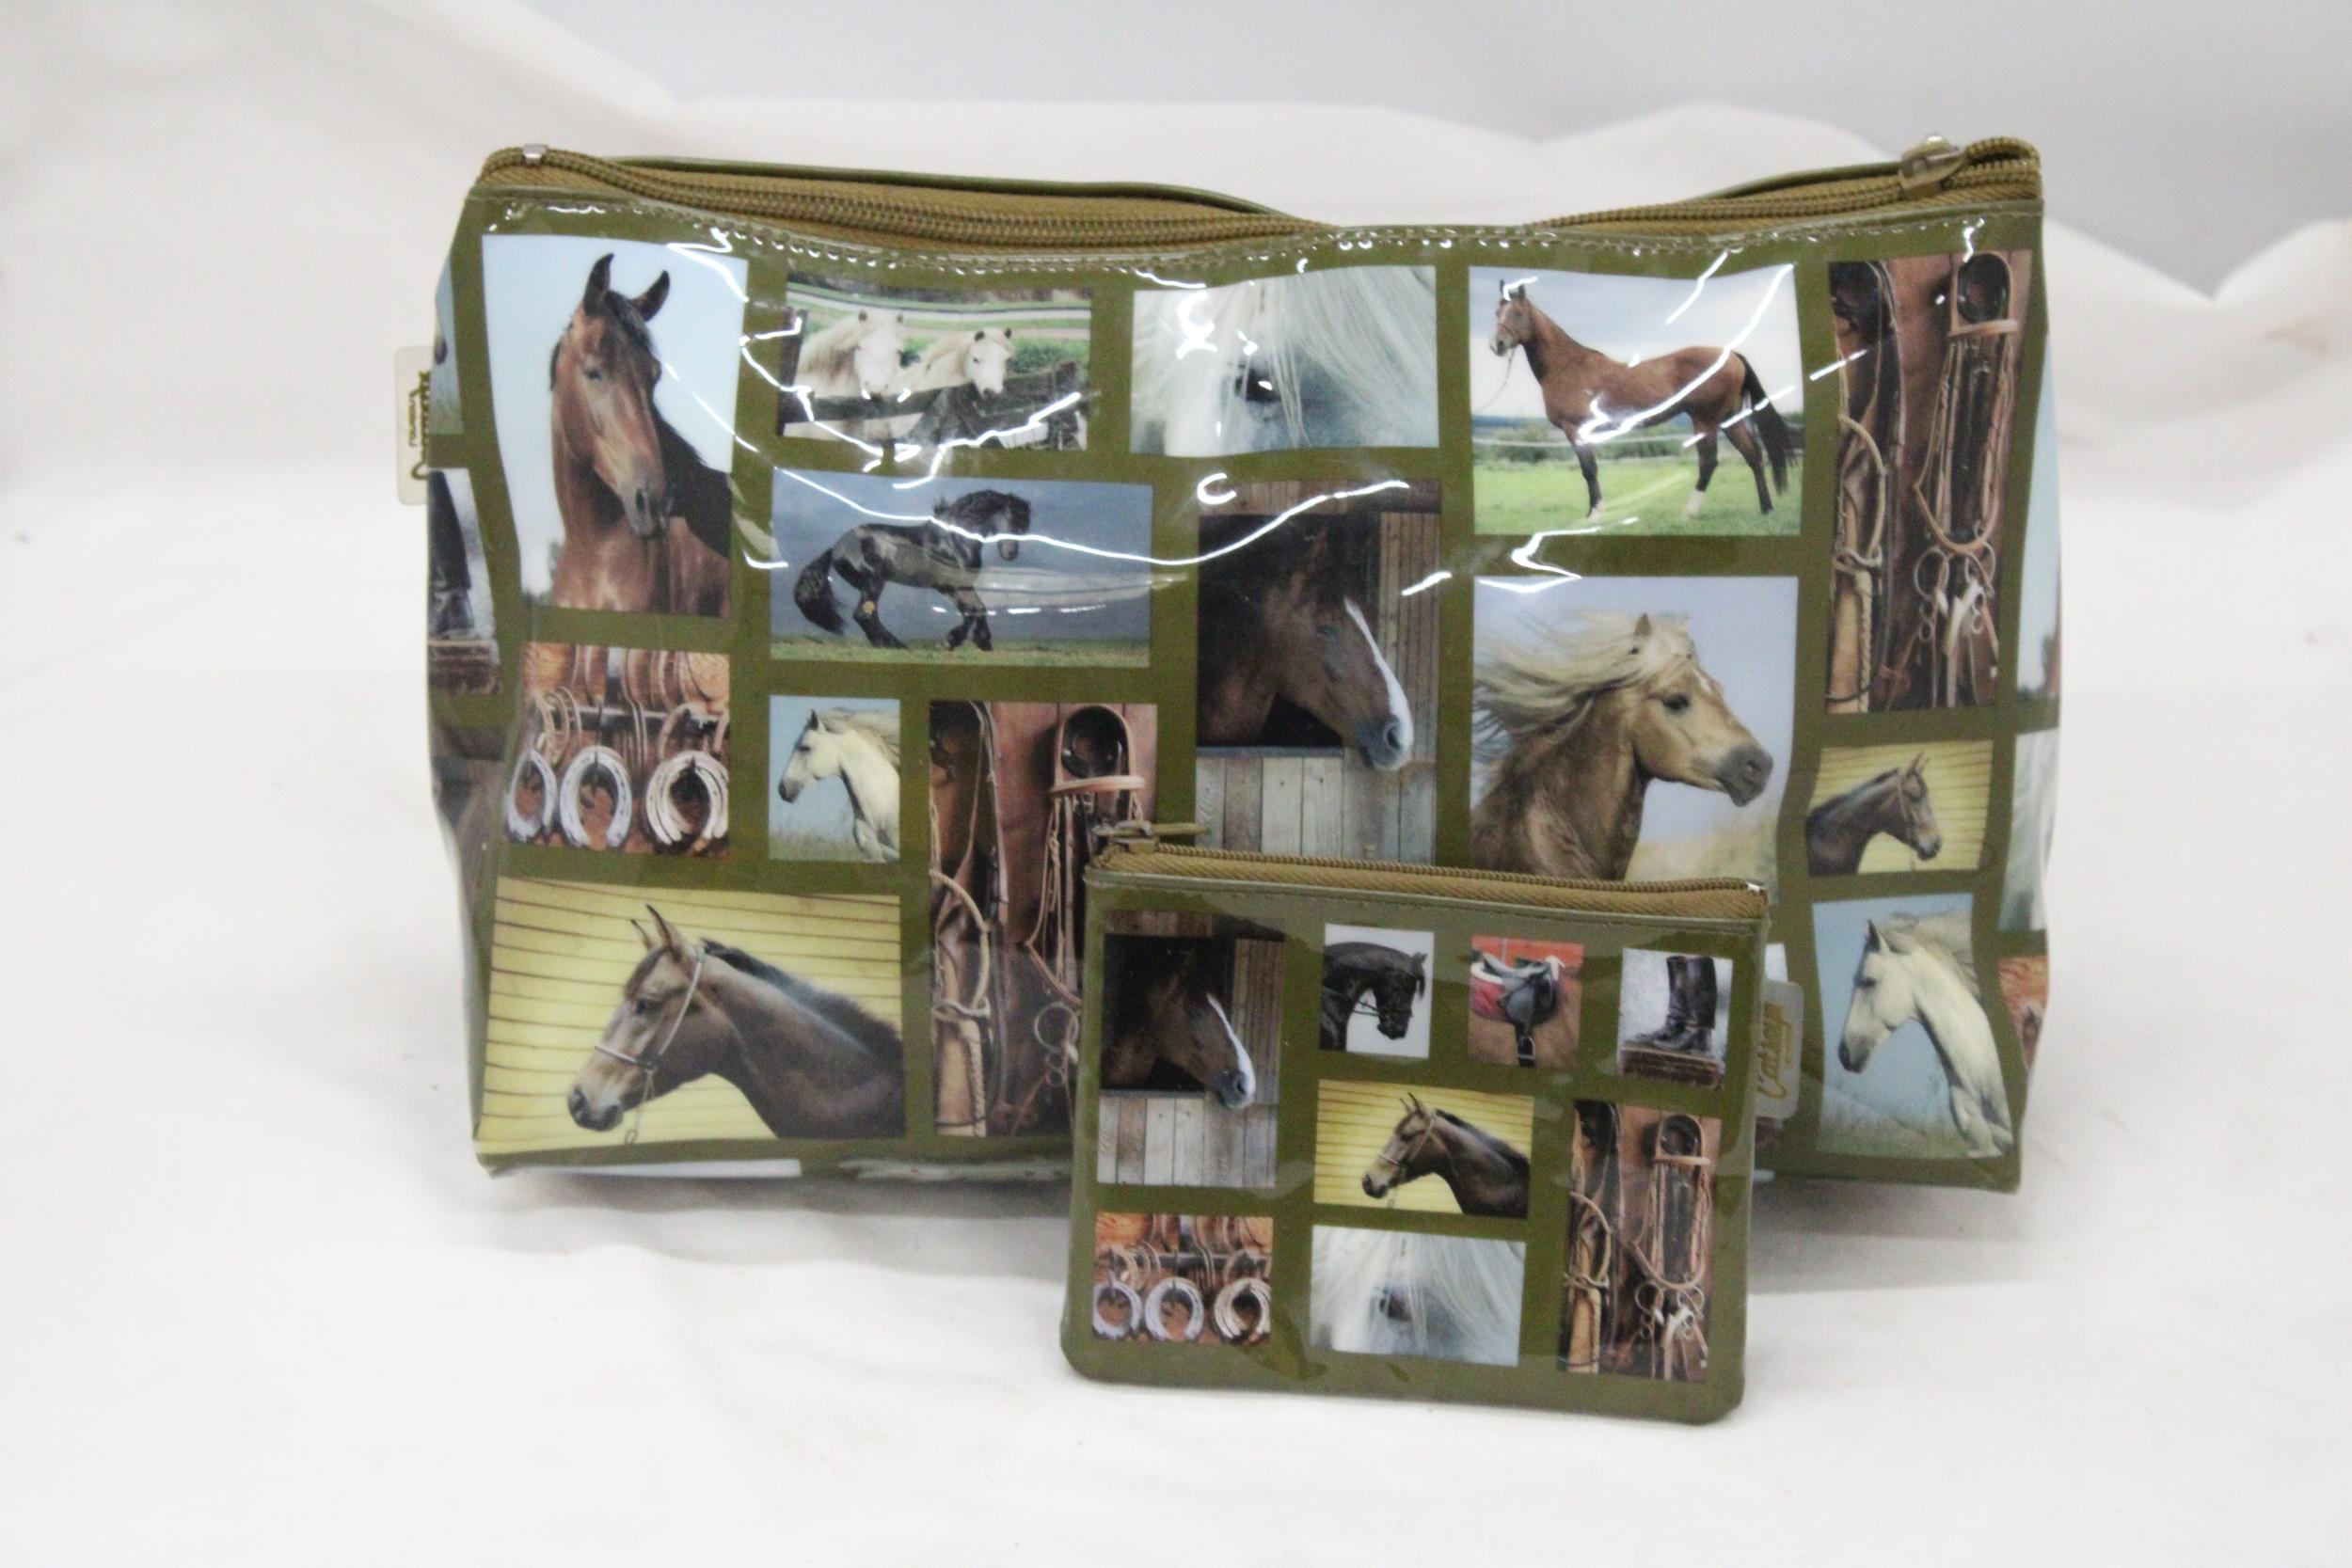 A DESIGNER "HORSEY" BAG WITH A MATCHING PURSE BY CATSEYE OF LONDON